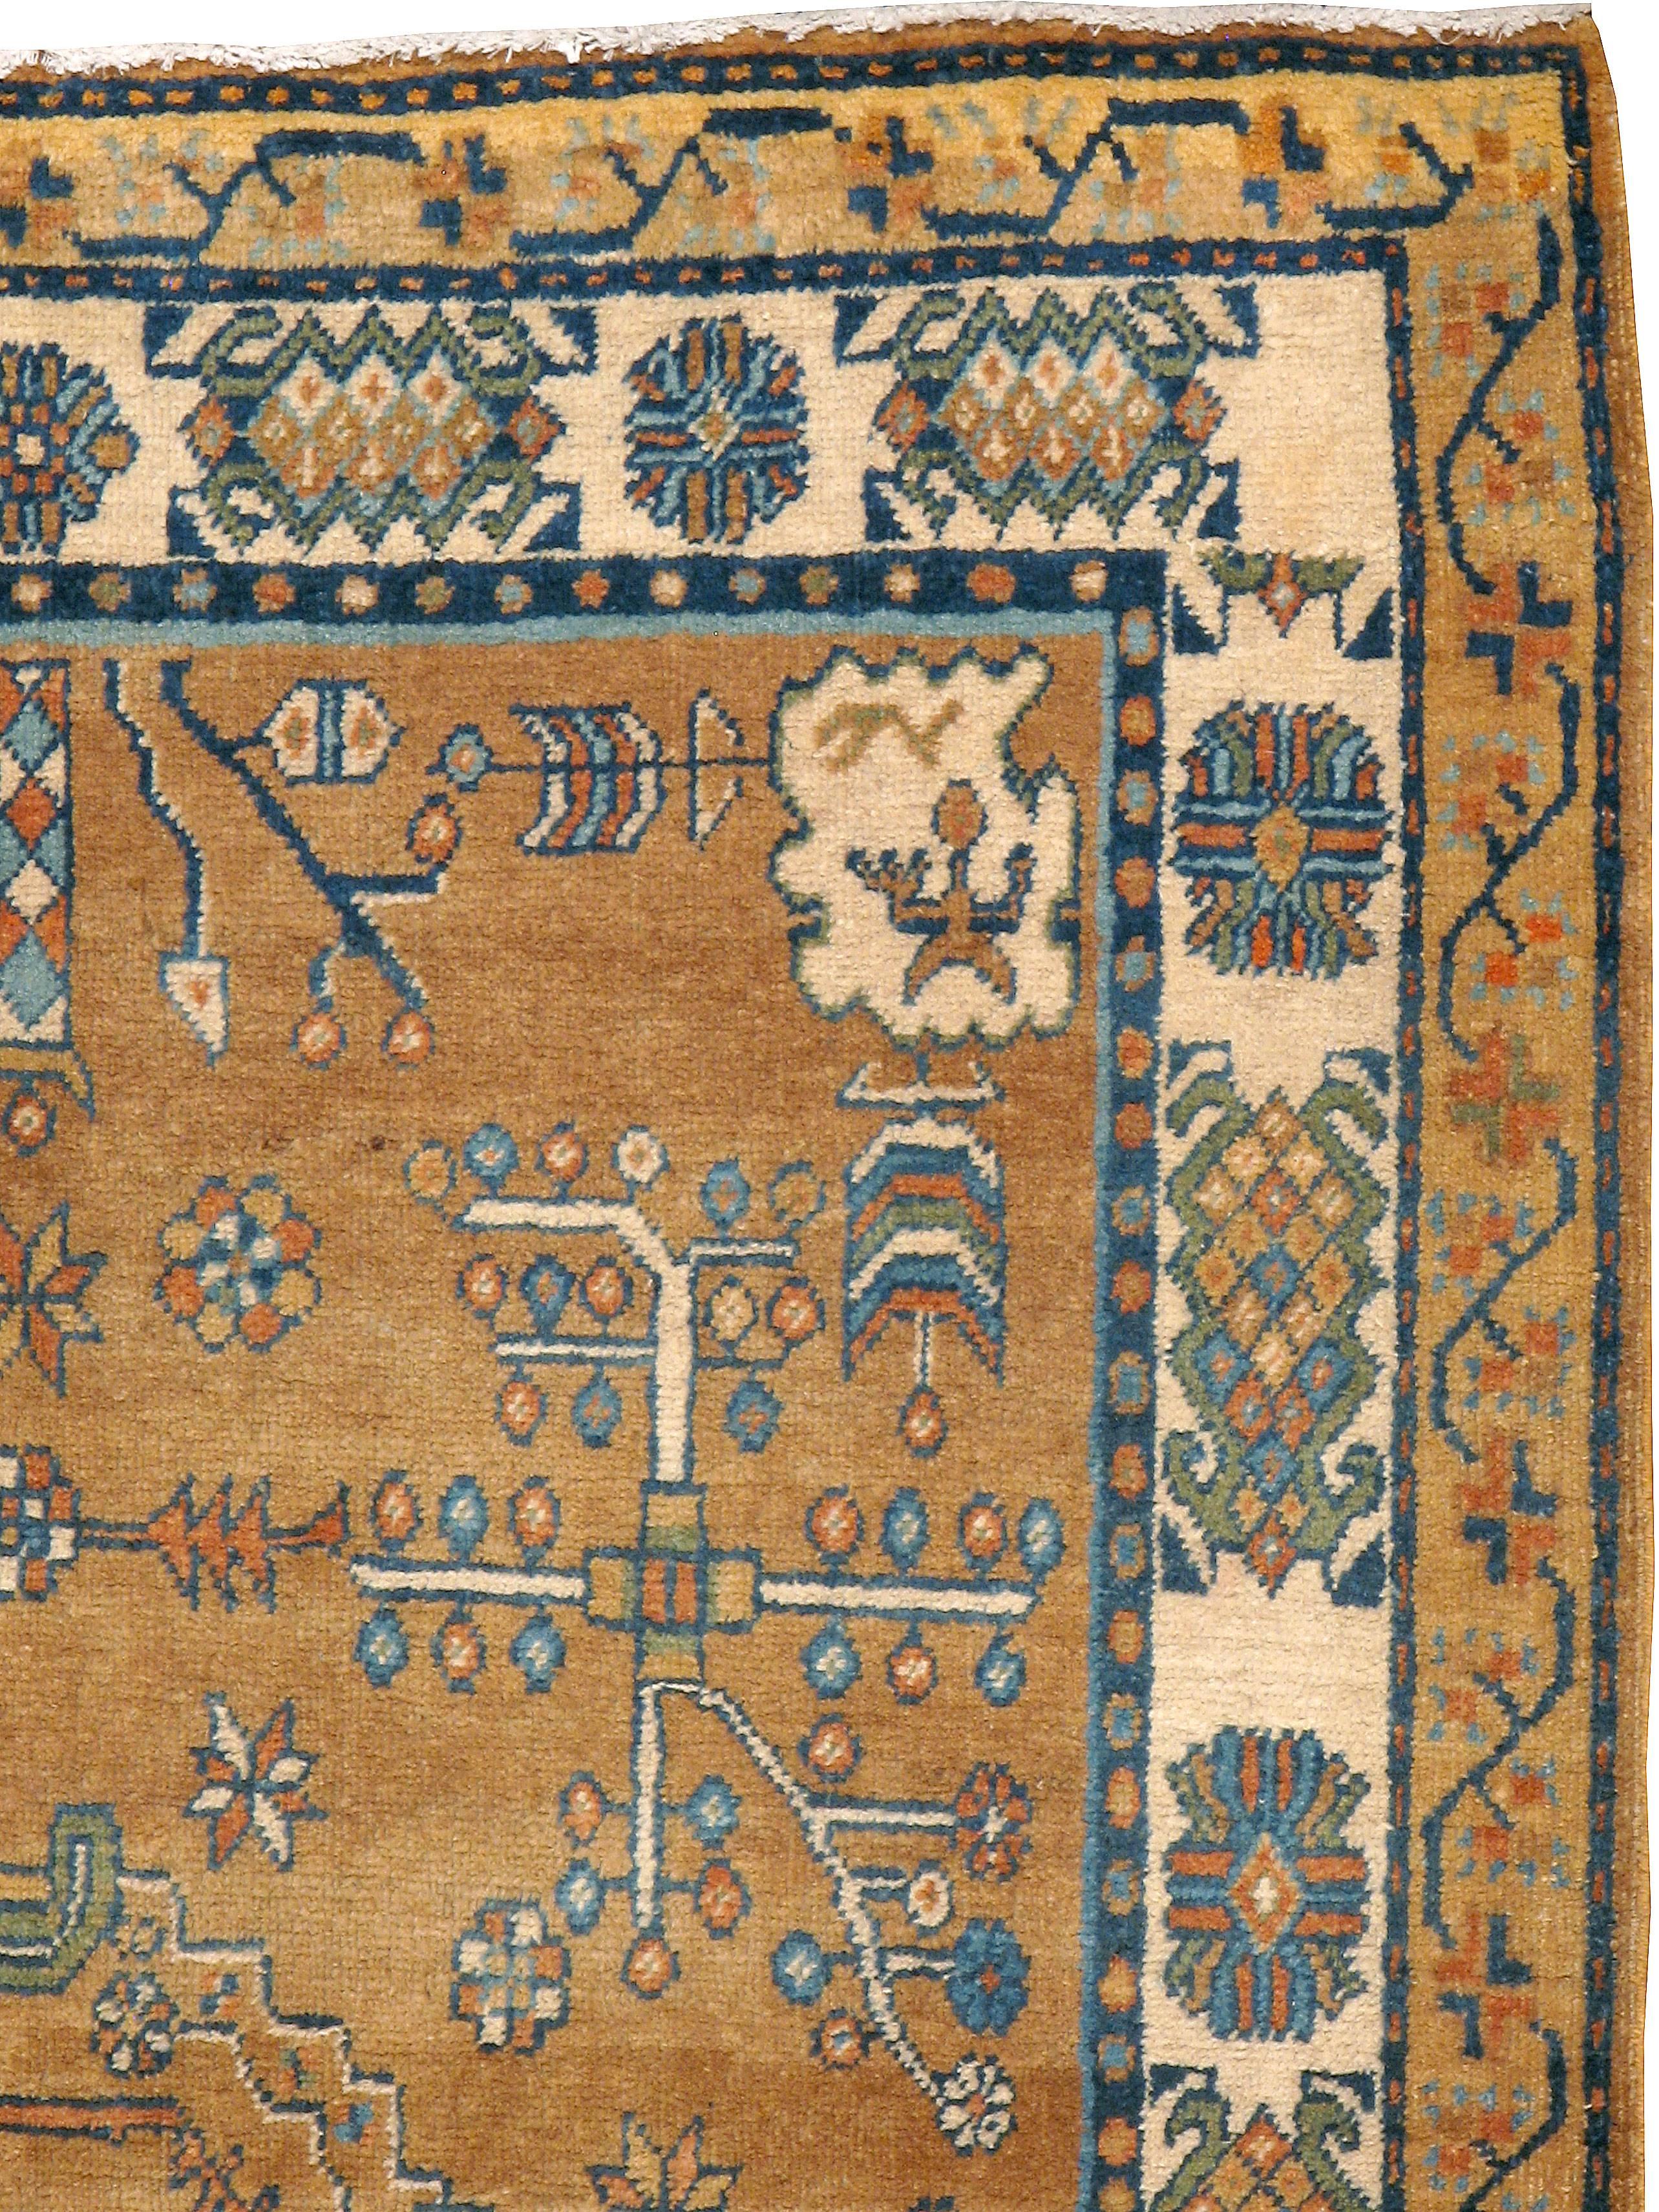 An antique East Turkestan Khotan carpet from the second quarter of the 20th century. Antique Khotan rugs and carpets were produced in the oasis town of Eastern Turkestan, today part of the Xinjiang region in Western China. This area has had a steady